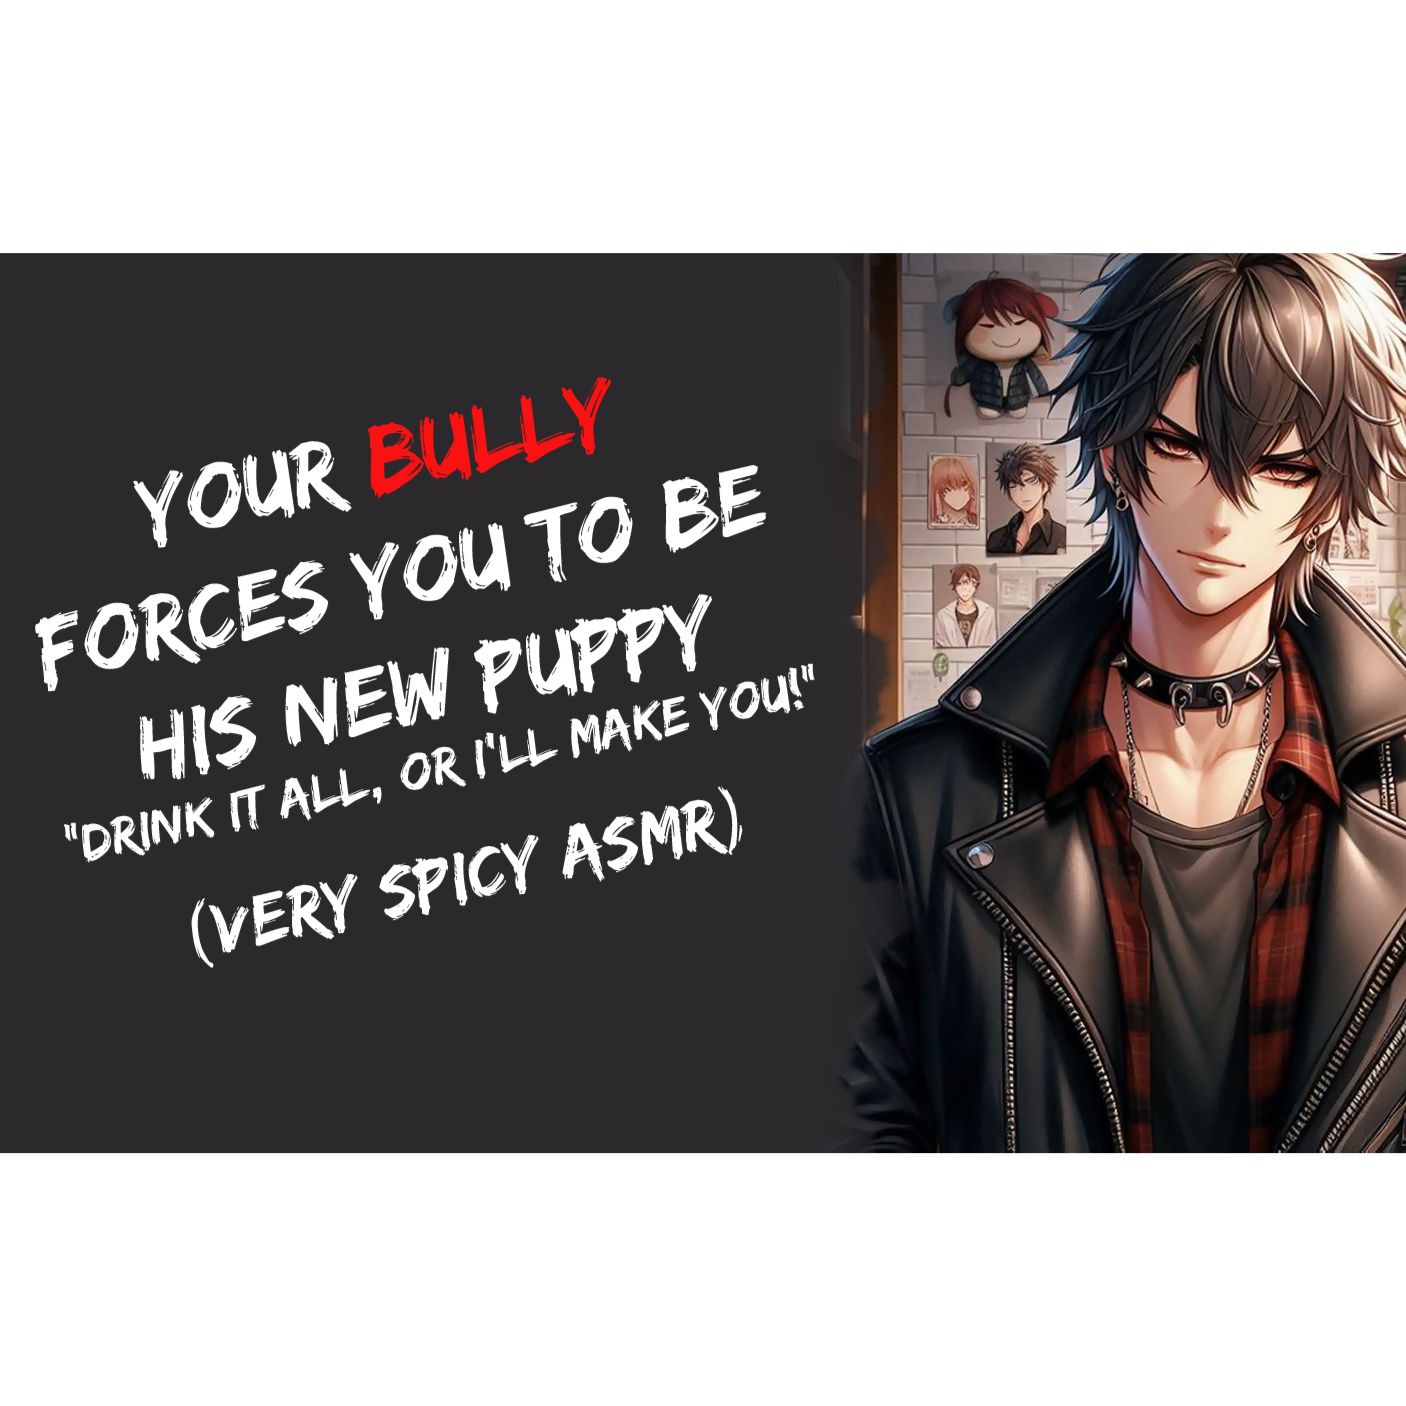 Your Bully Forces You To Be His New Puppy "Drink It All, Or I'll Make You!" (Very Spicy ASMR)